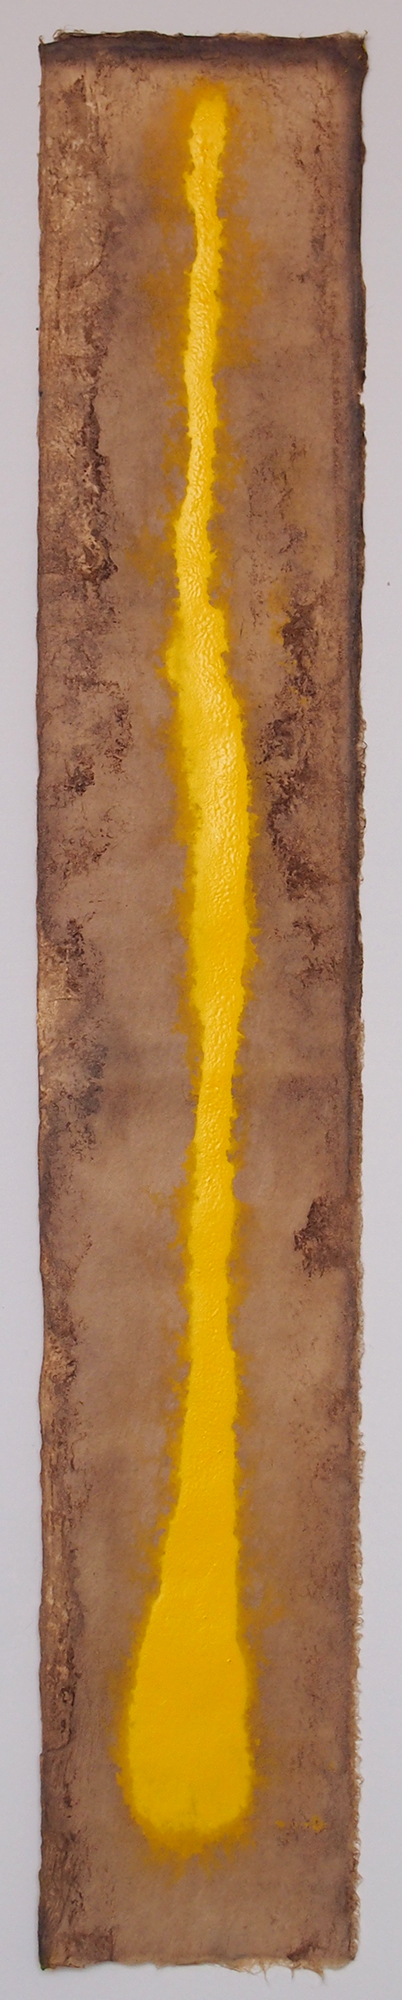 LINDA THARP On Paper 25 x 4.25 inches, 2013